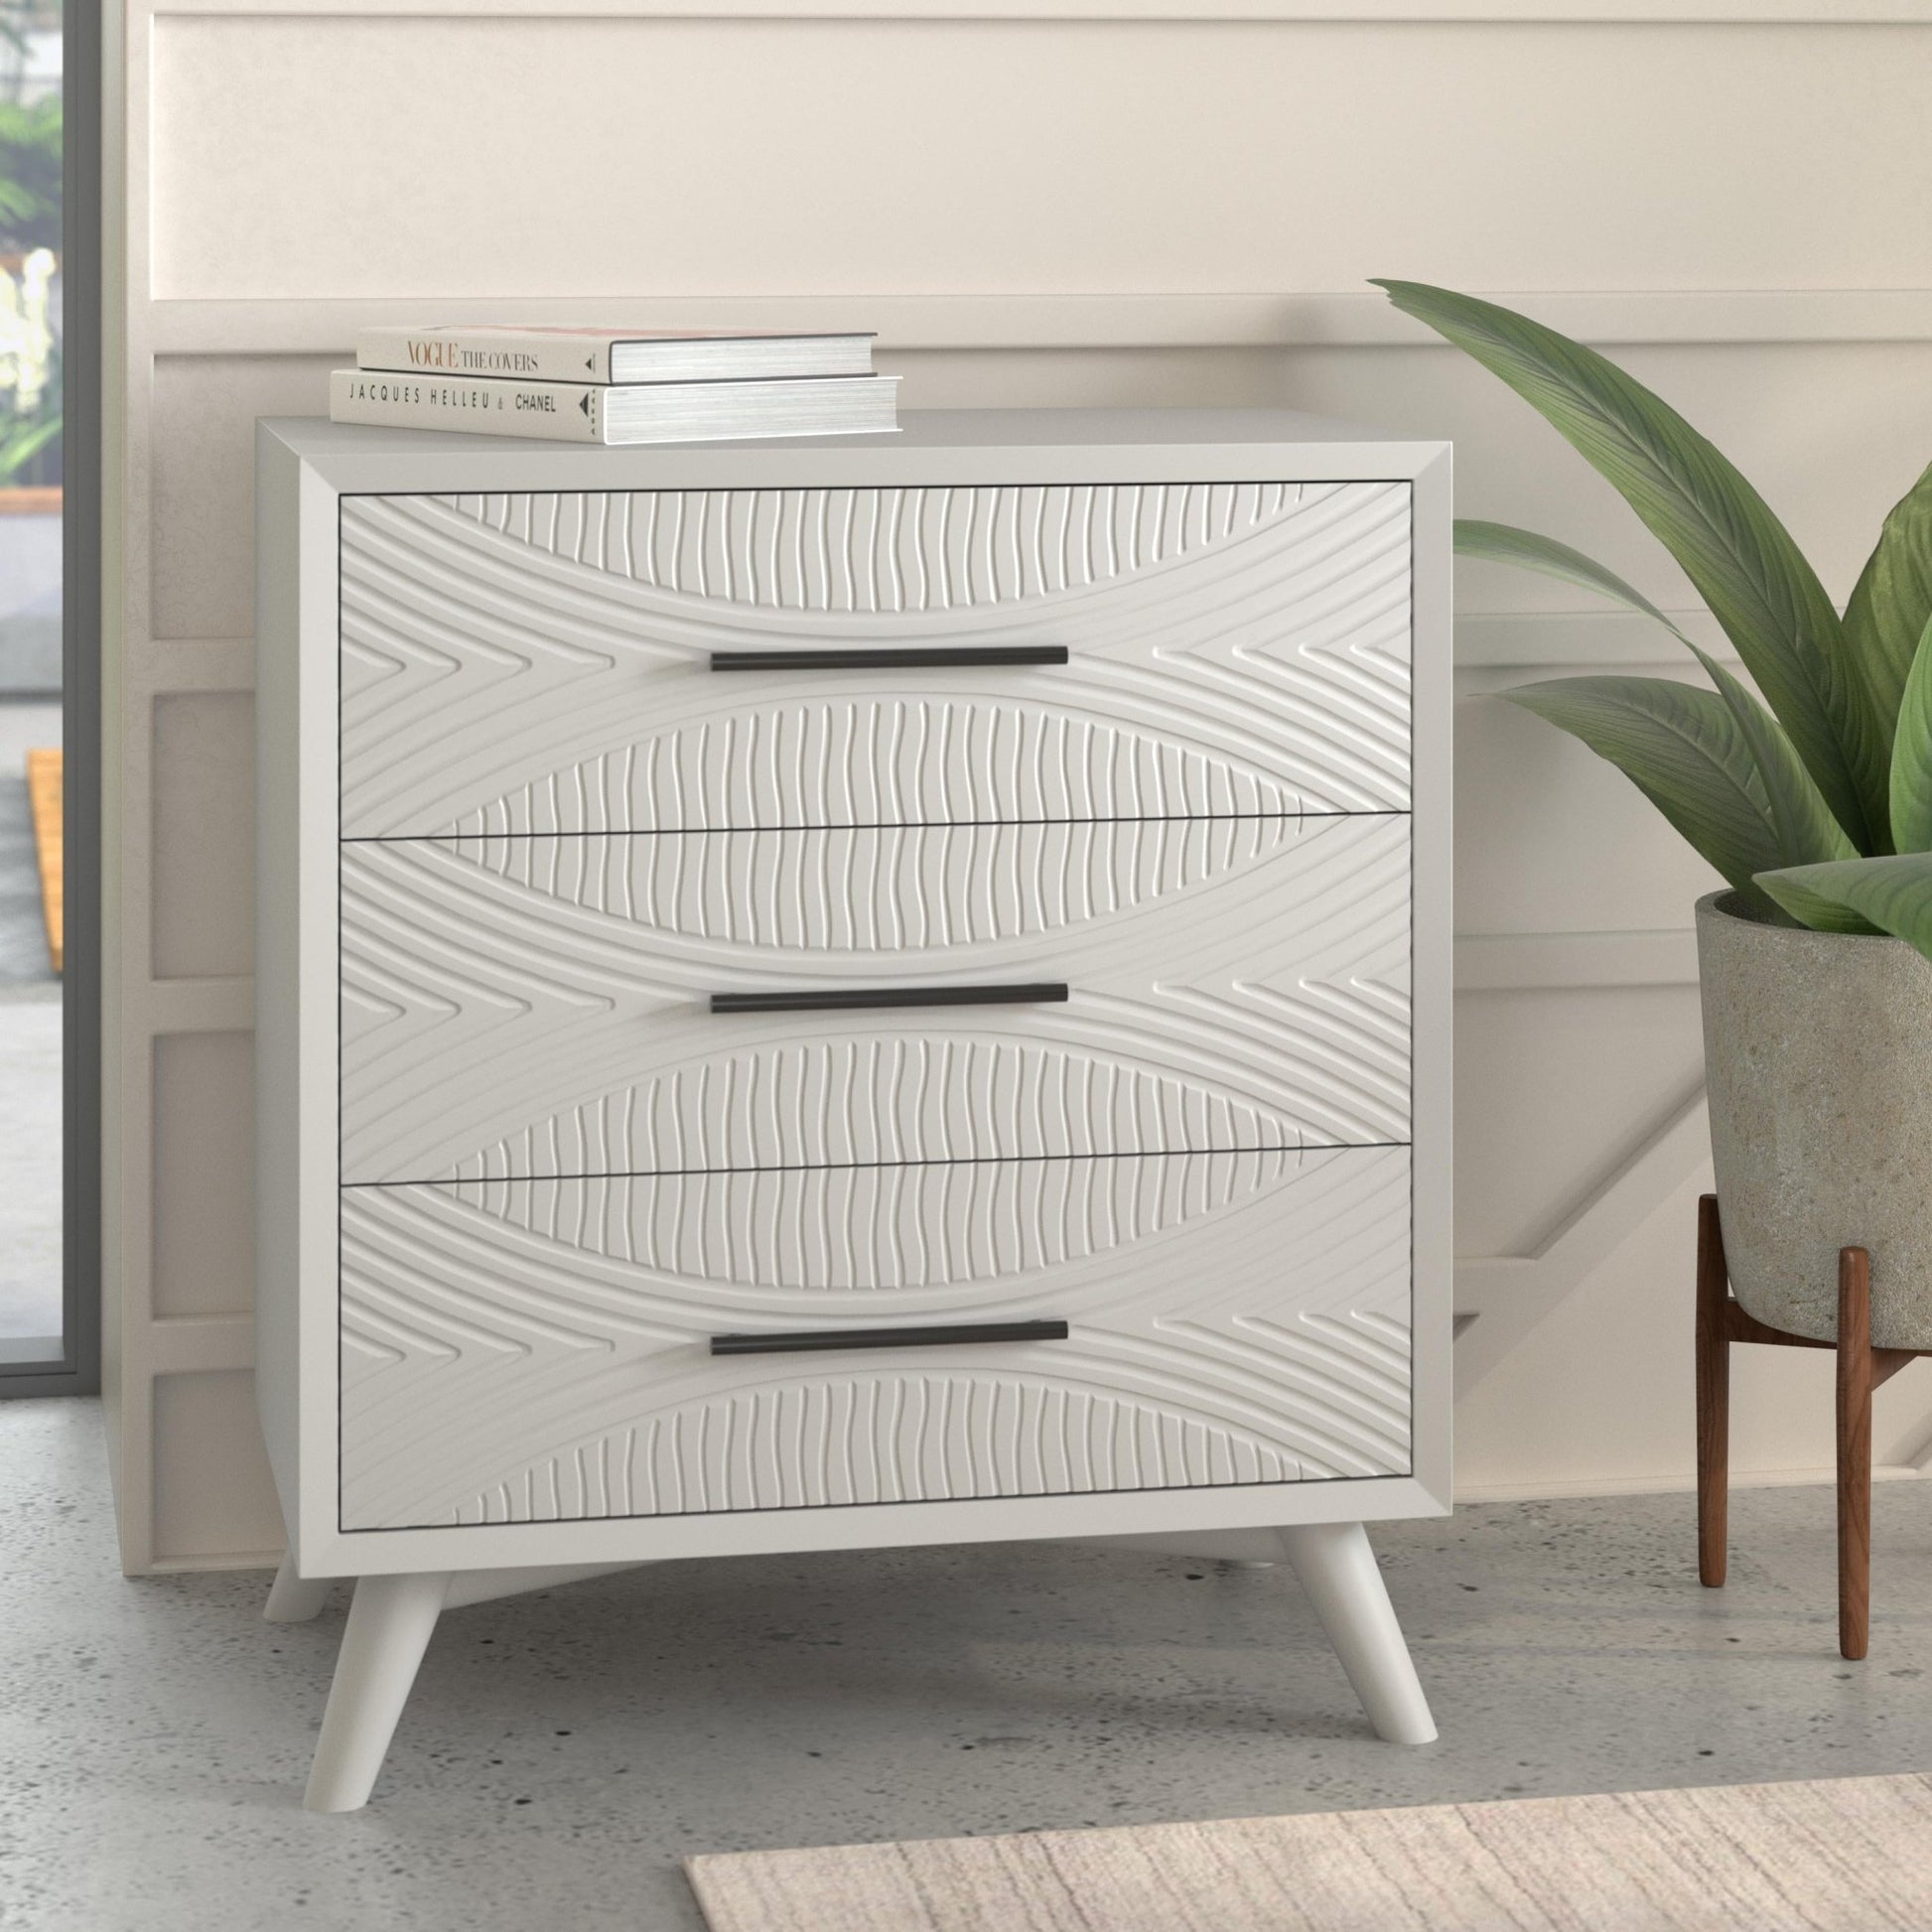 Tranquility Small Chest, White - Alpine Furniture